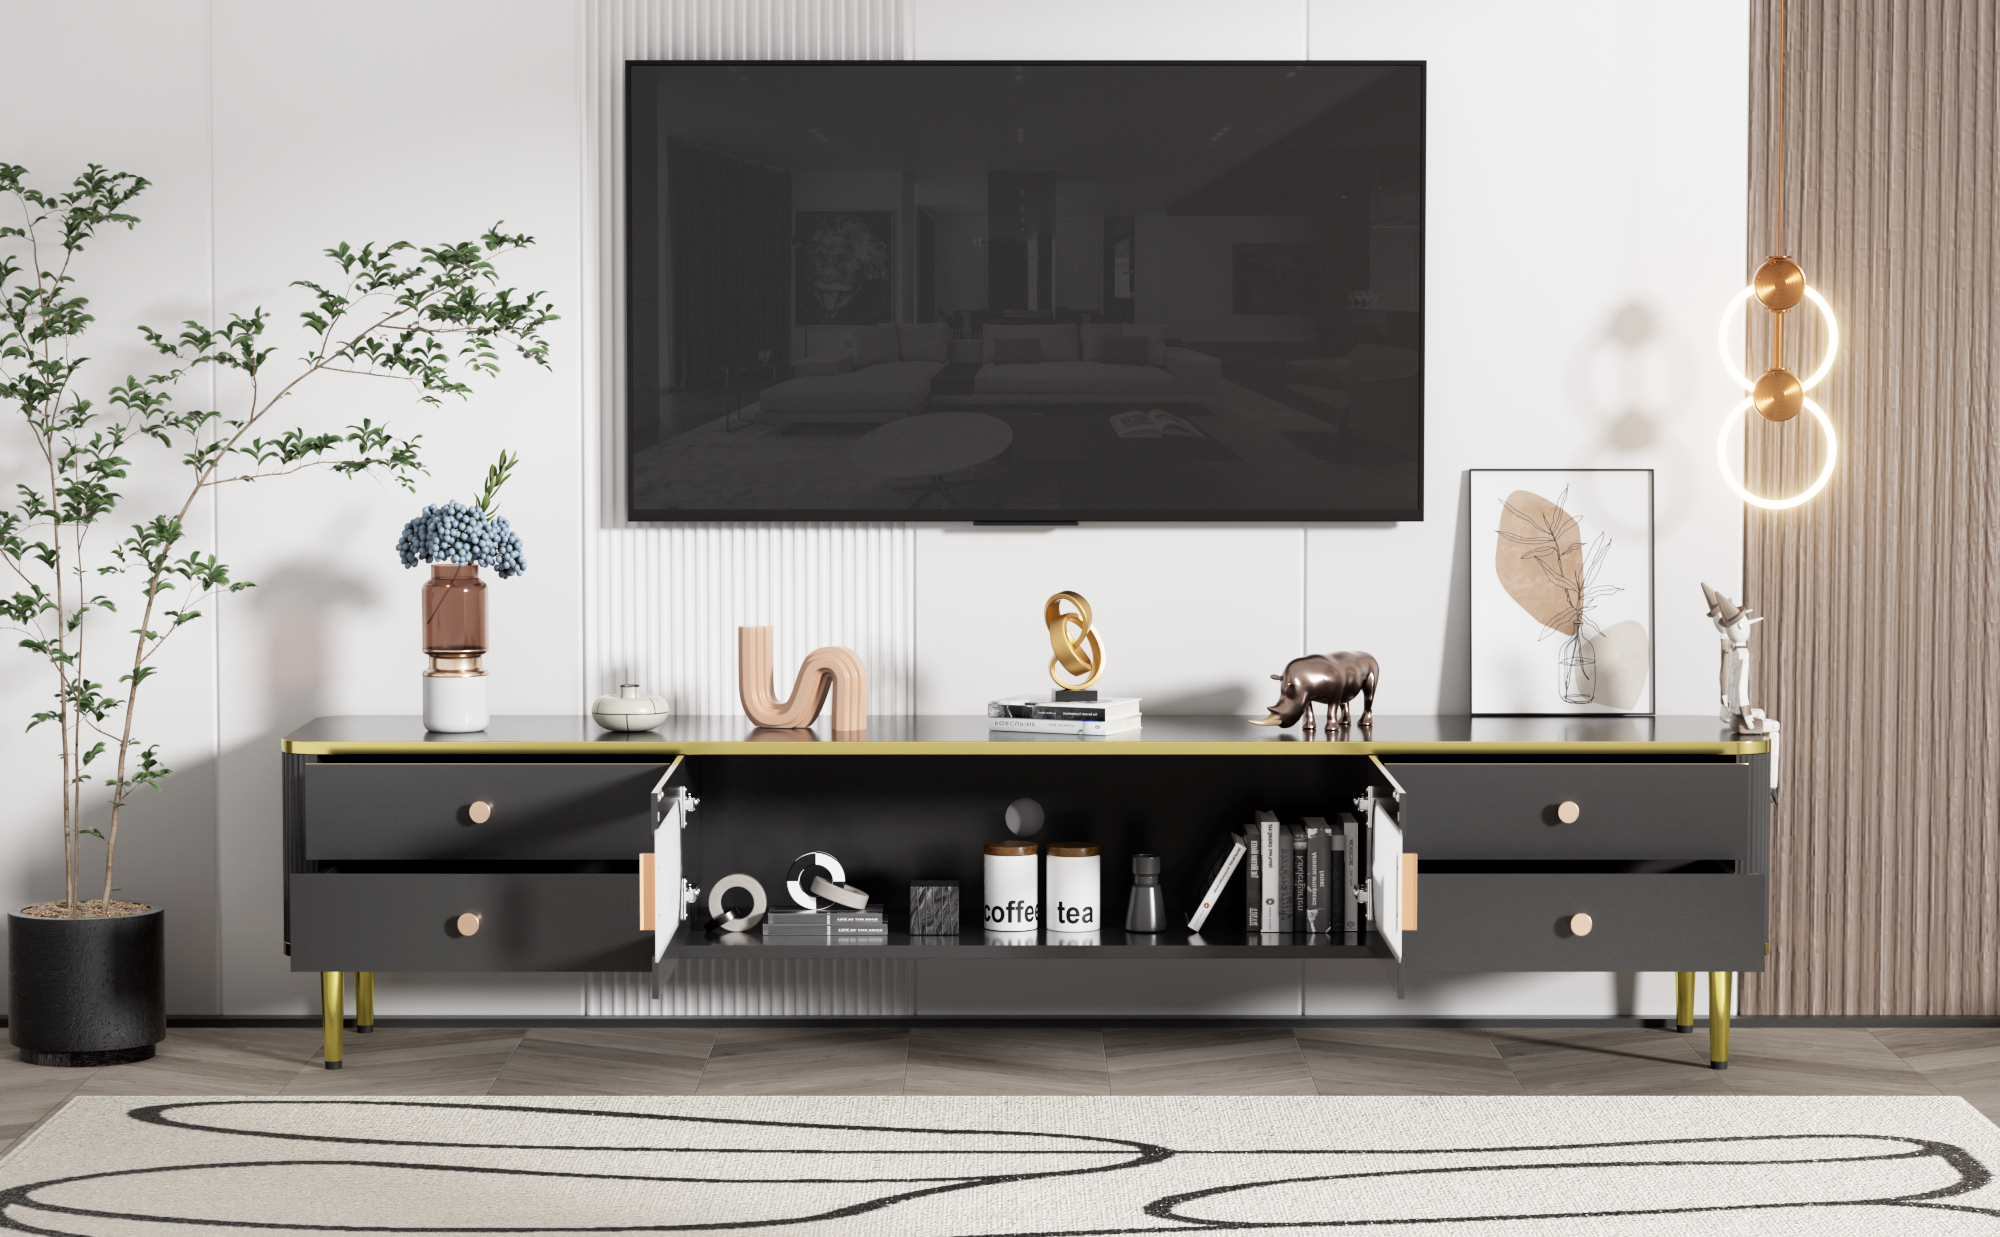 U Can TV Stand for 65 Inch TV, Entertainment Center TV black-mdf